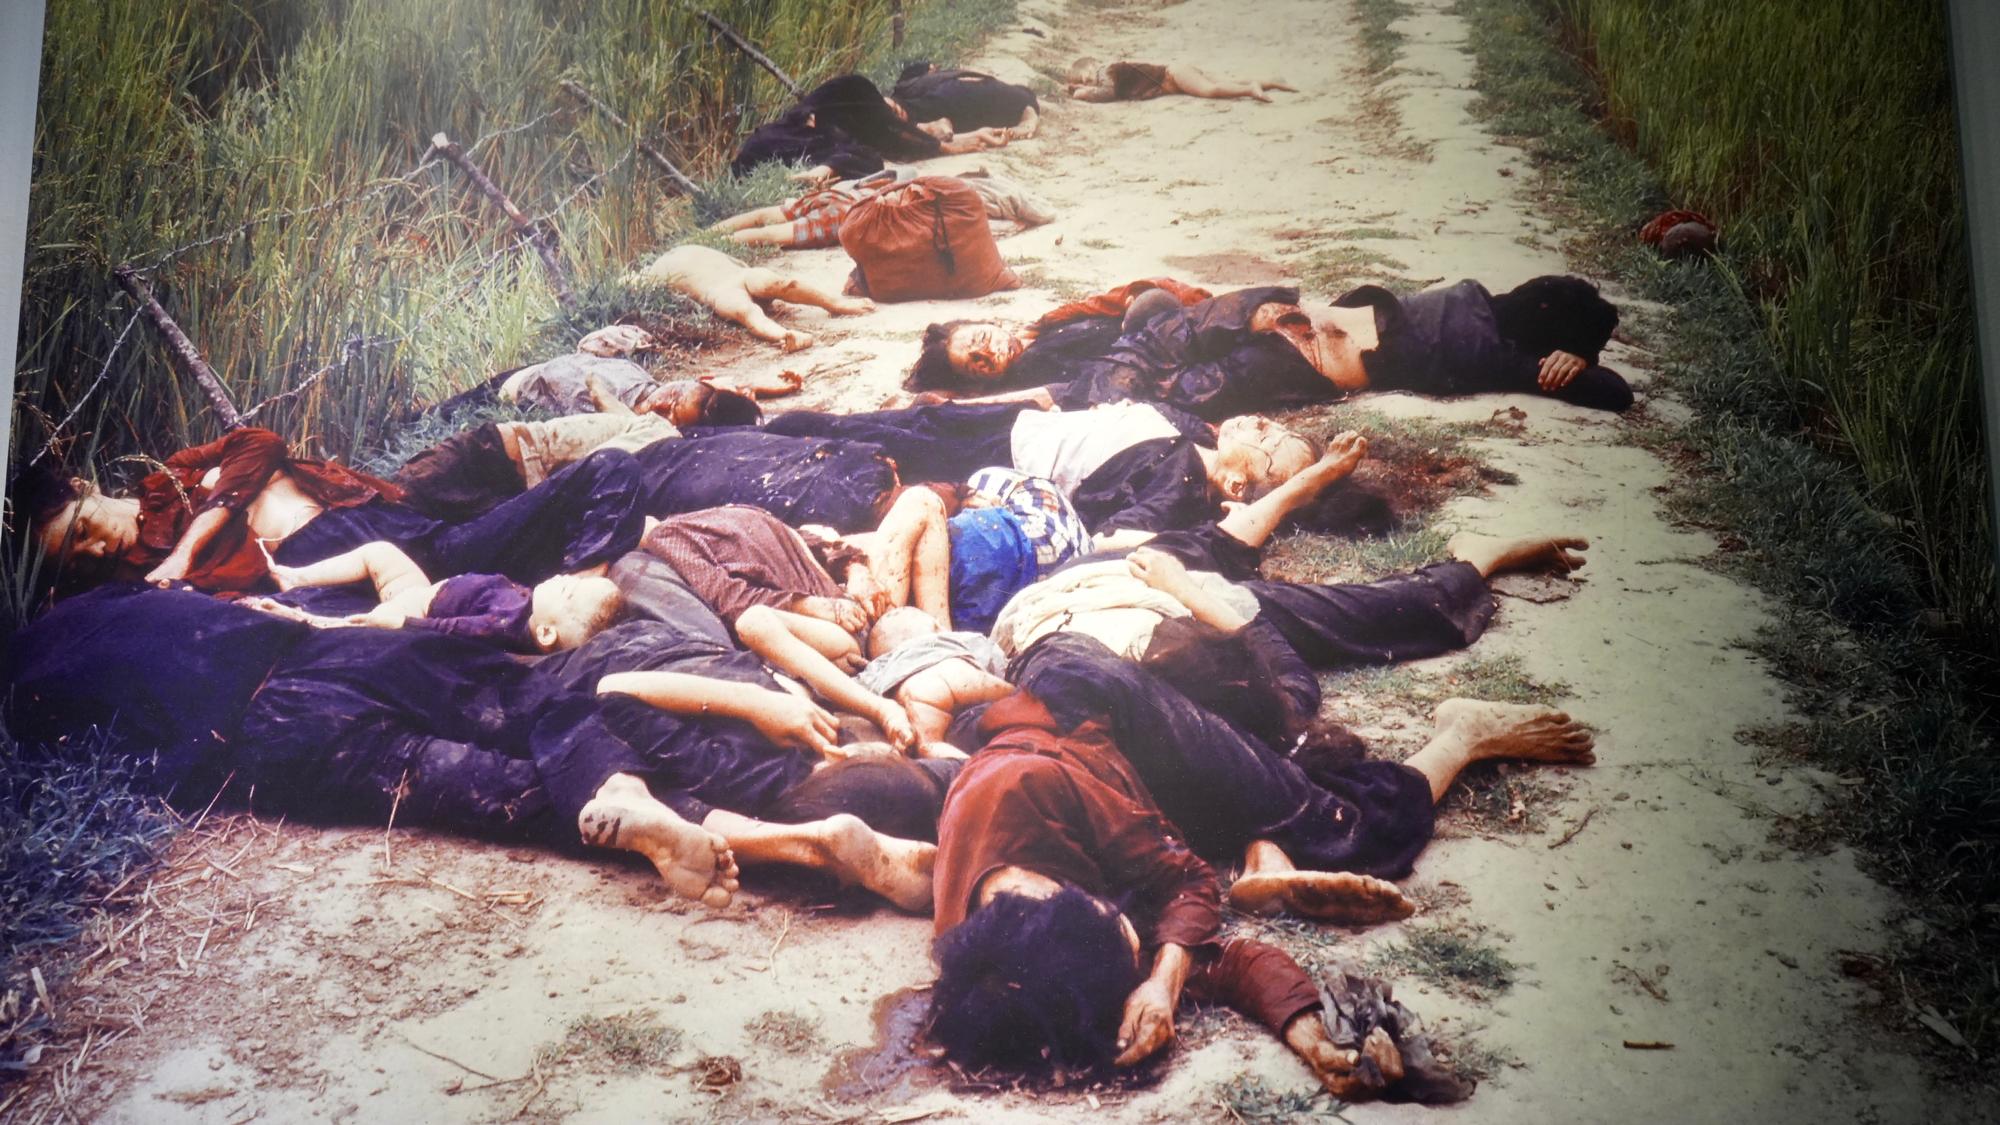 Some of the hundreds of My Lai victims